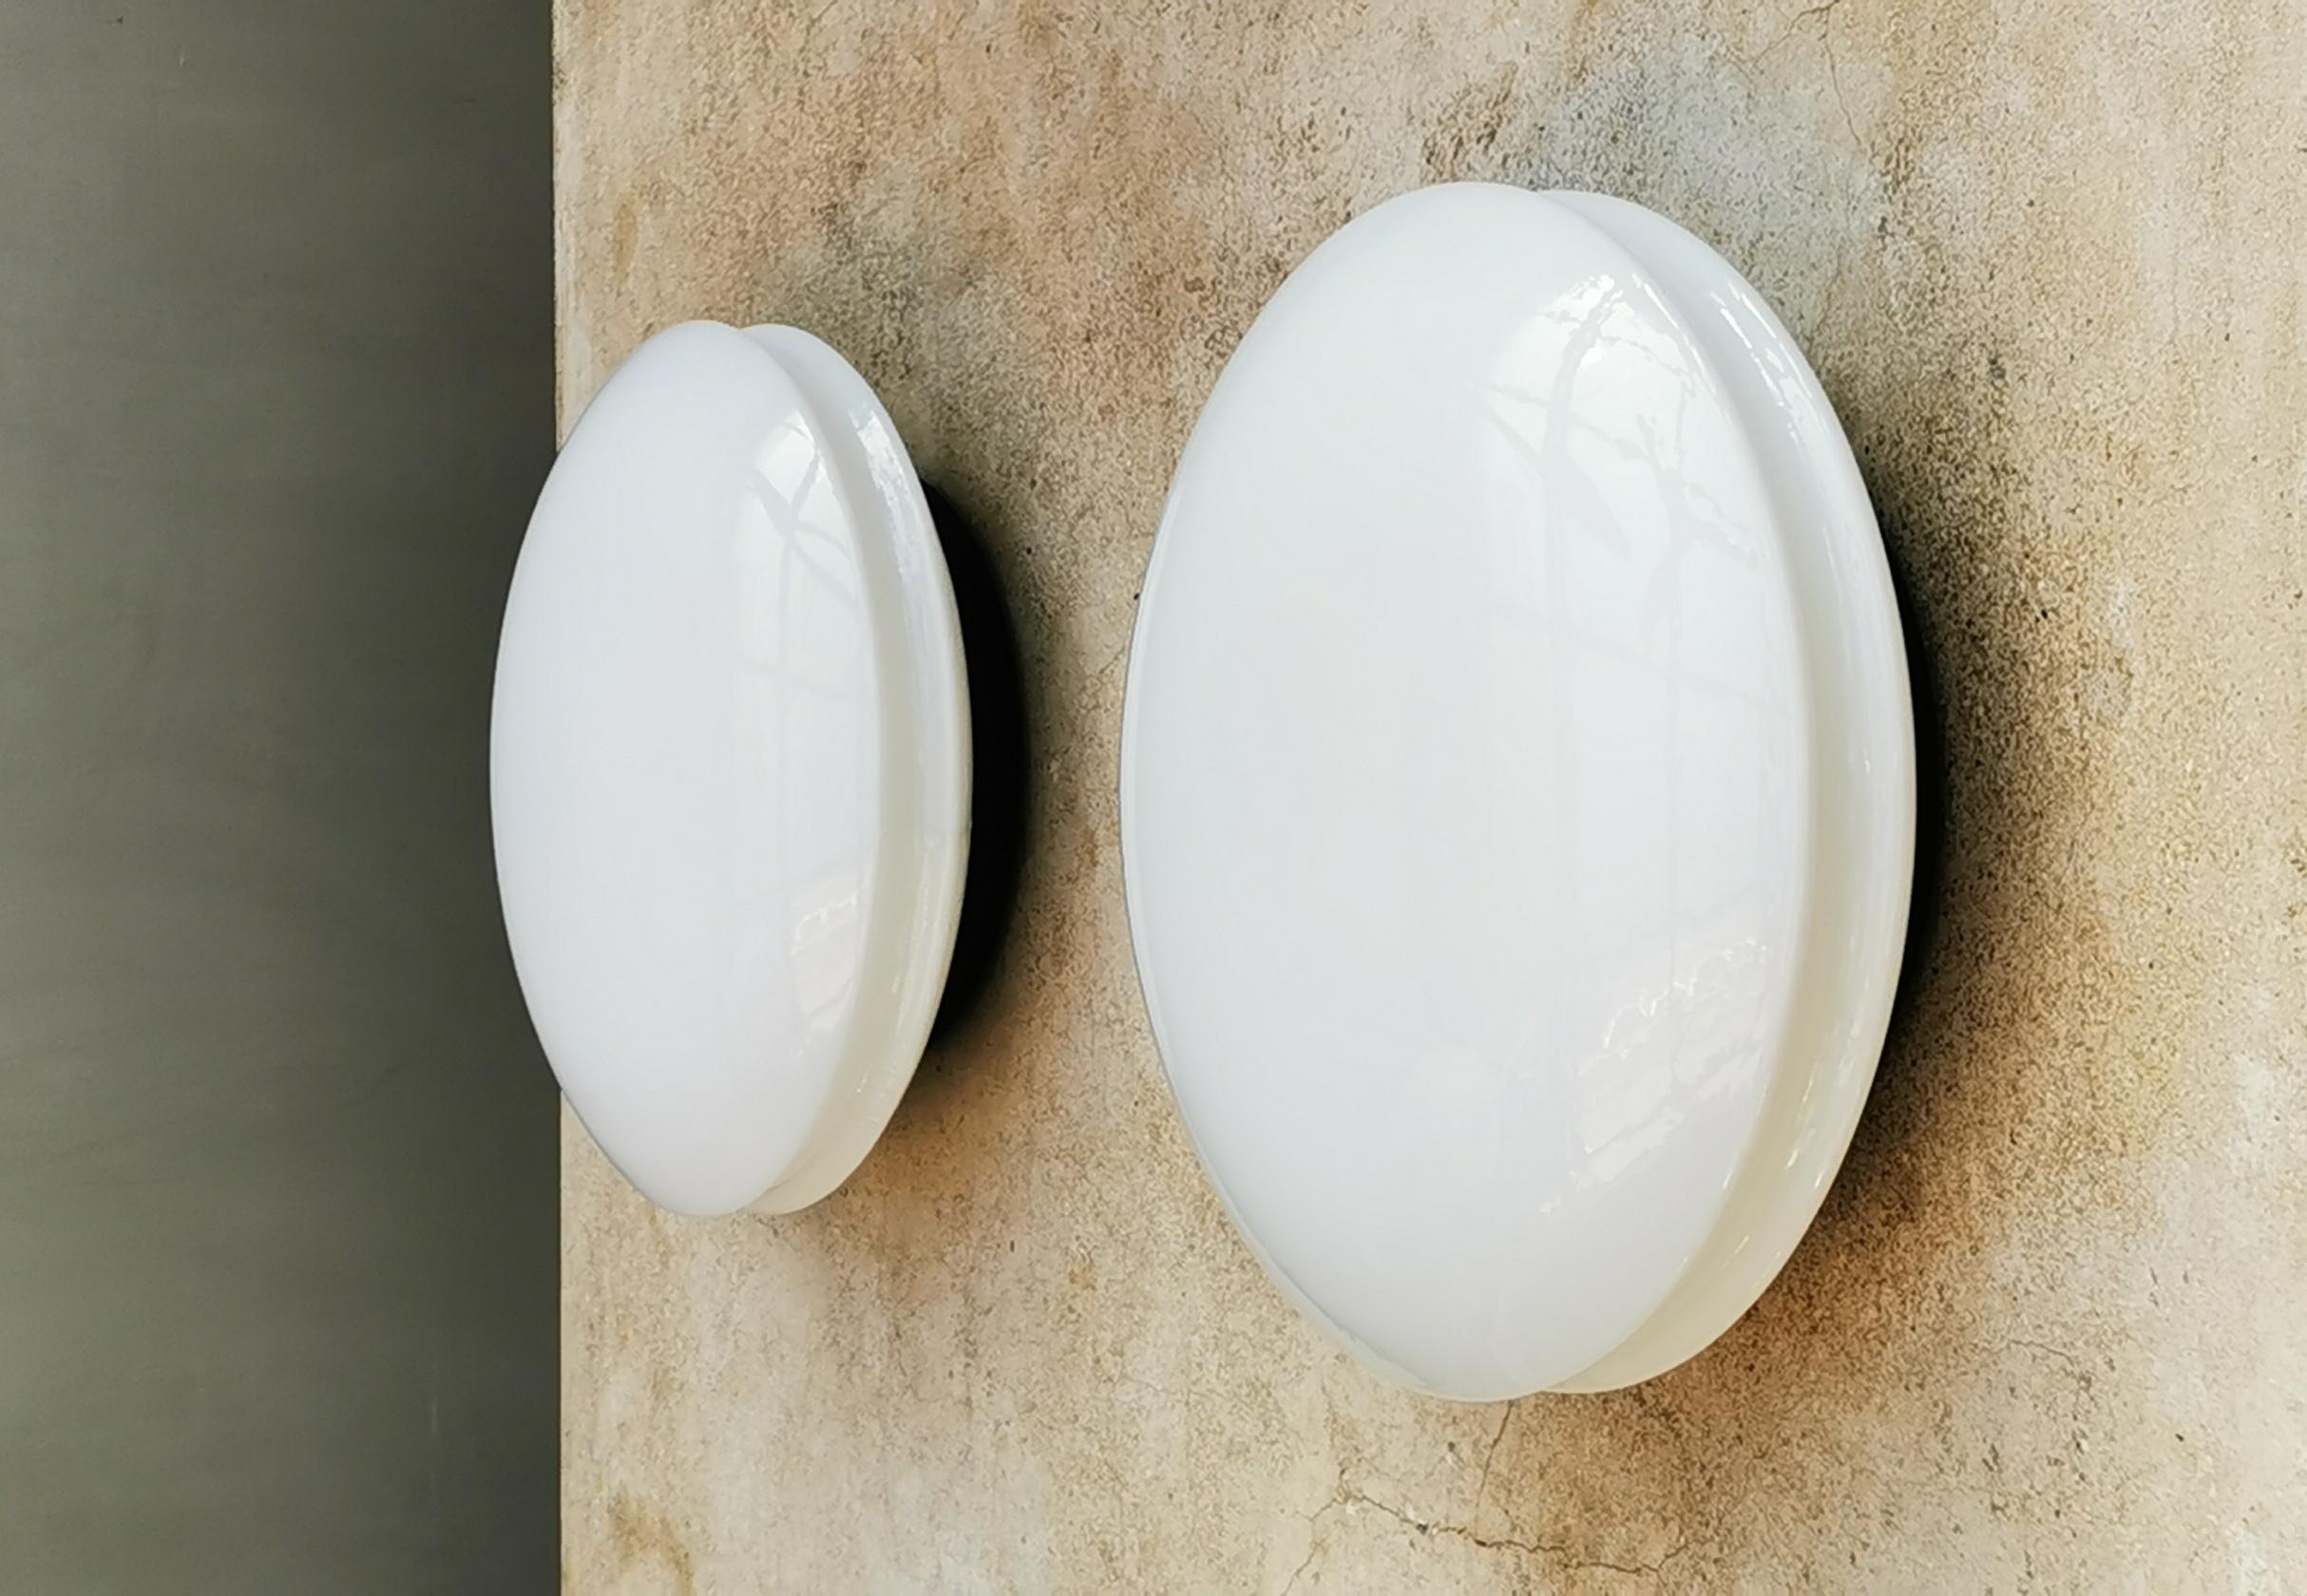 Very rare lights, specialy two pieces !
Beautiful milk glass soft diffusers.
Lamps lighted like to float, because the mount baseplates are painted in mat black.
Look great in kitchen and bathroom.
Sockets: E27

